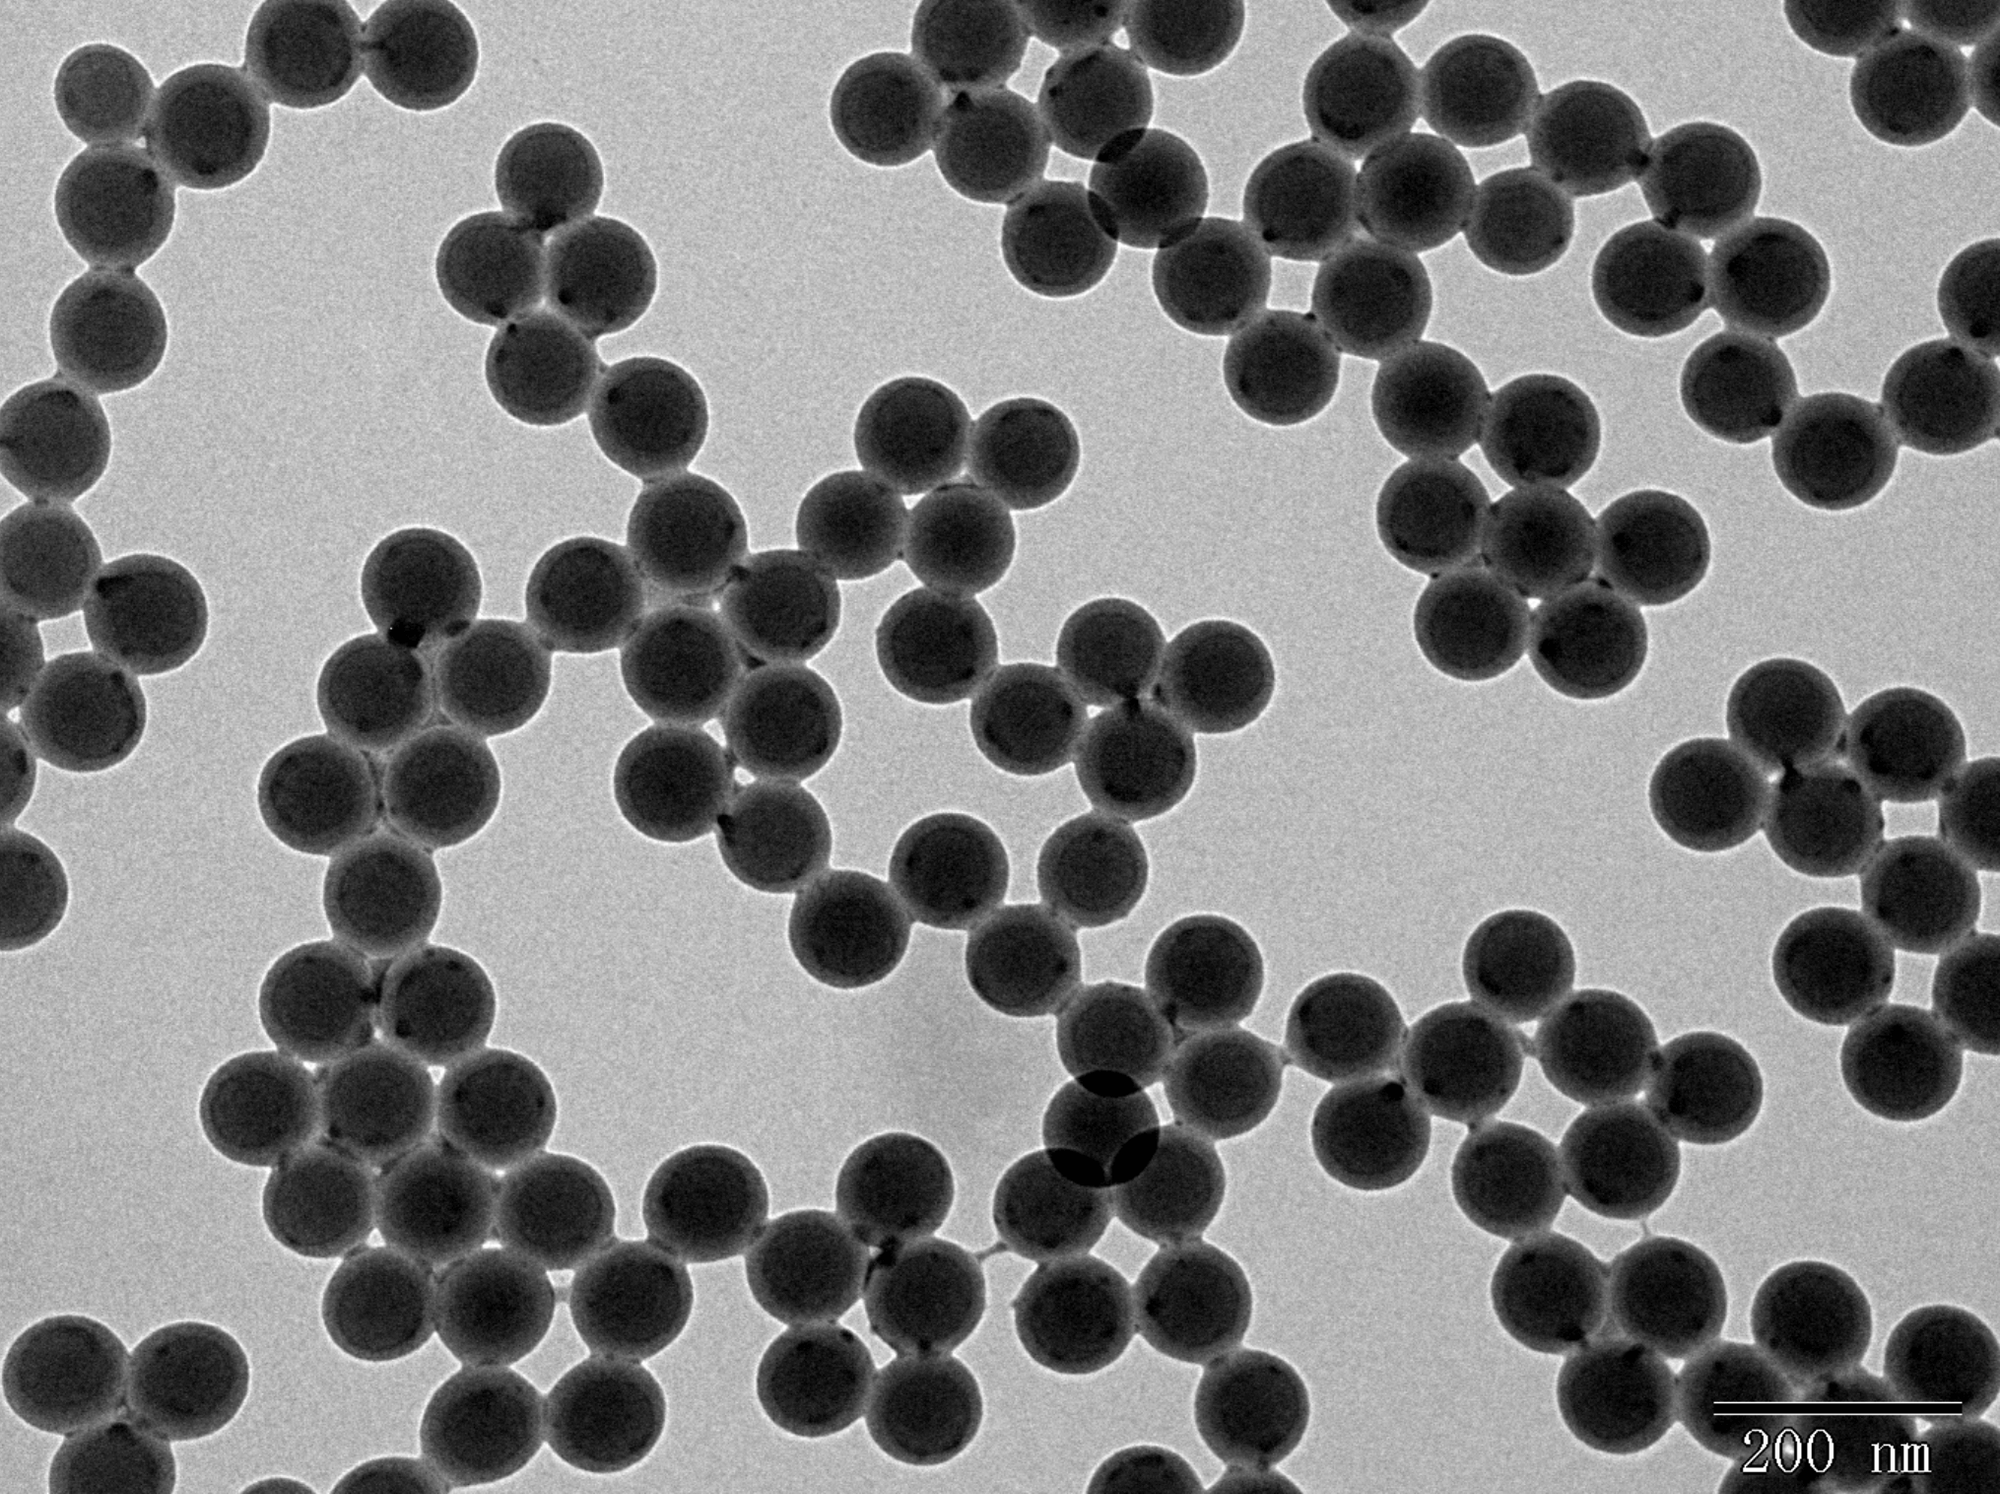 Action of Polystyrene nanoparticles | Must-know tips before starting your research